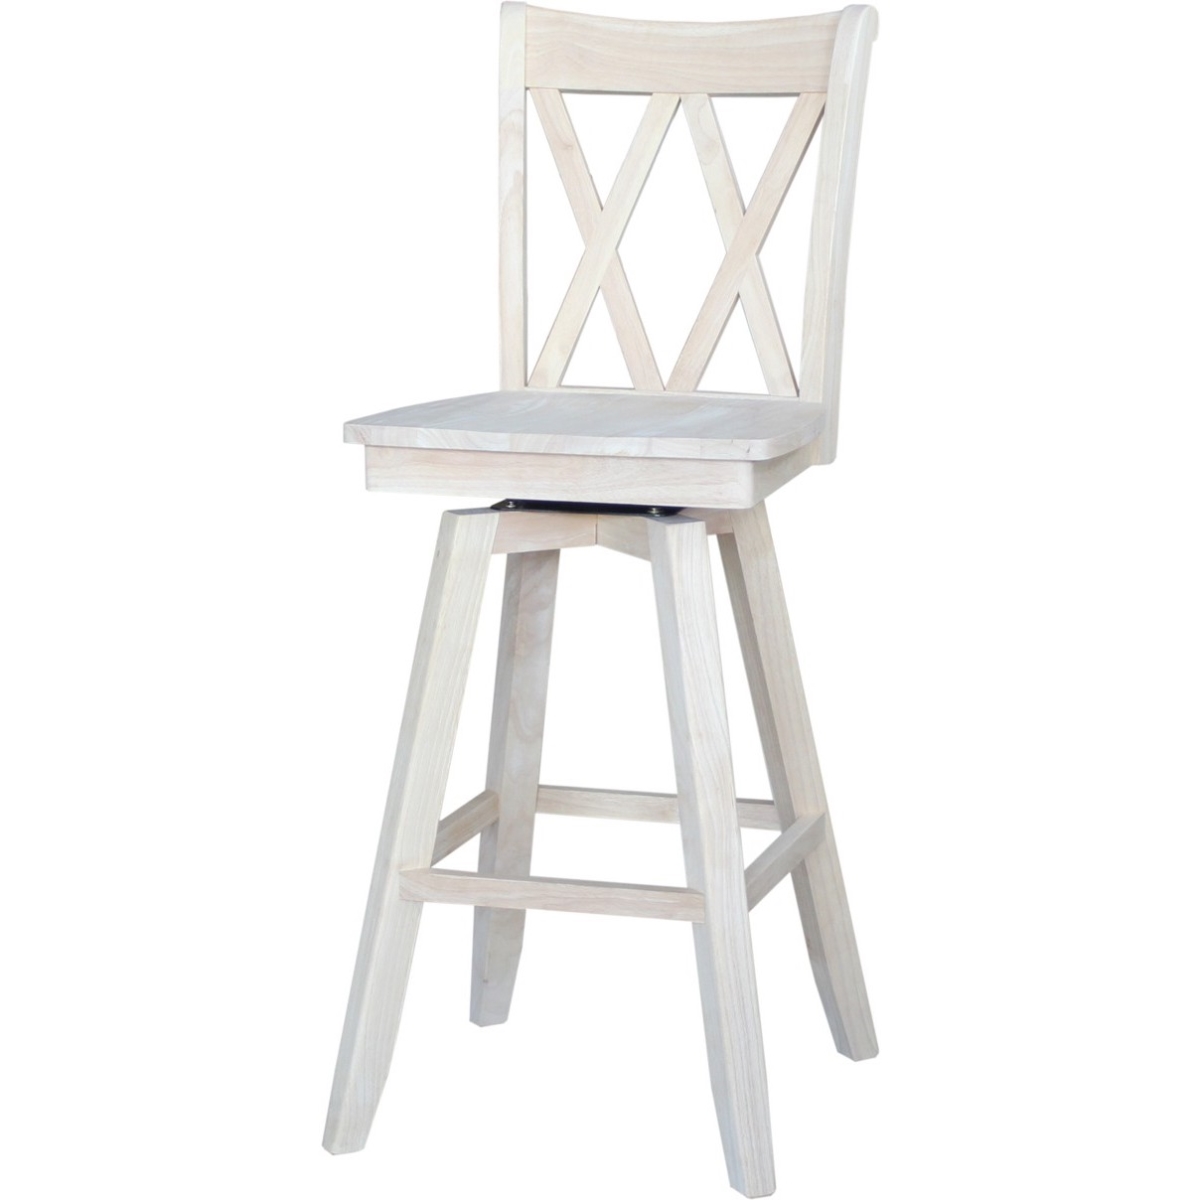 S-203sw 30 In. Seat Height Double X Back Bar Height Stool With Swivel & Auto Return